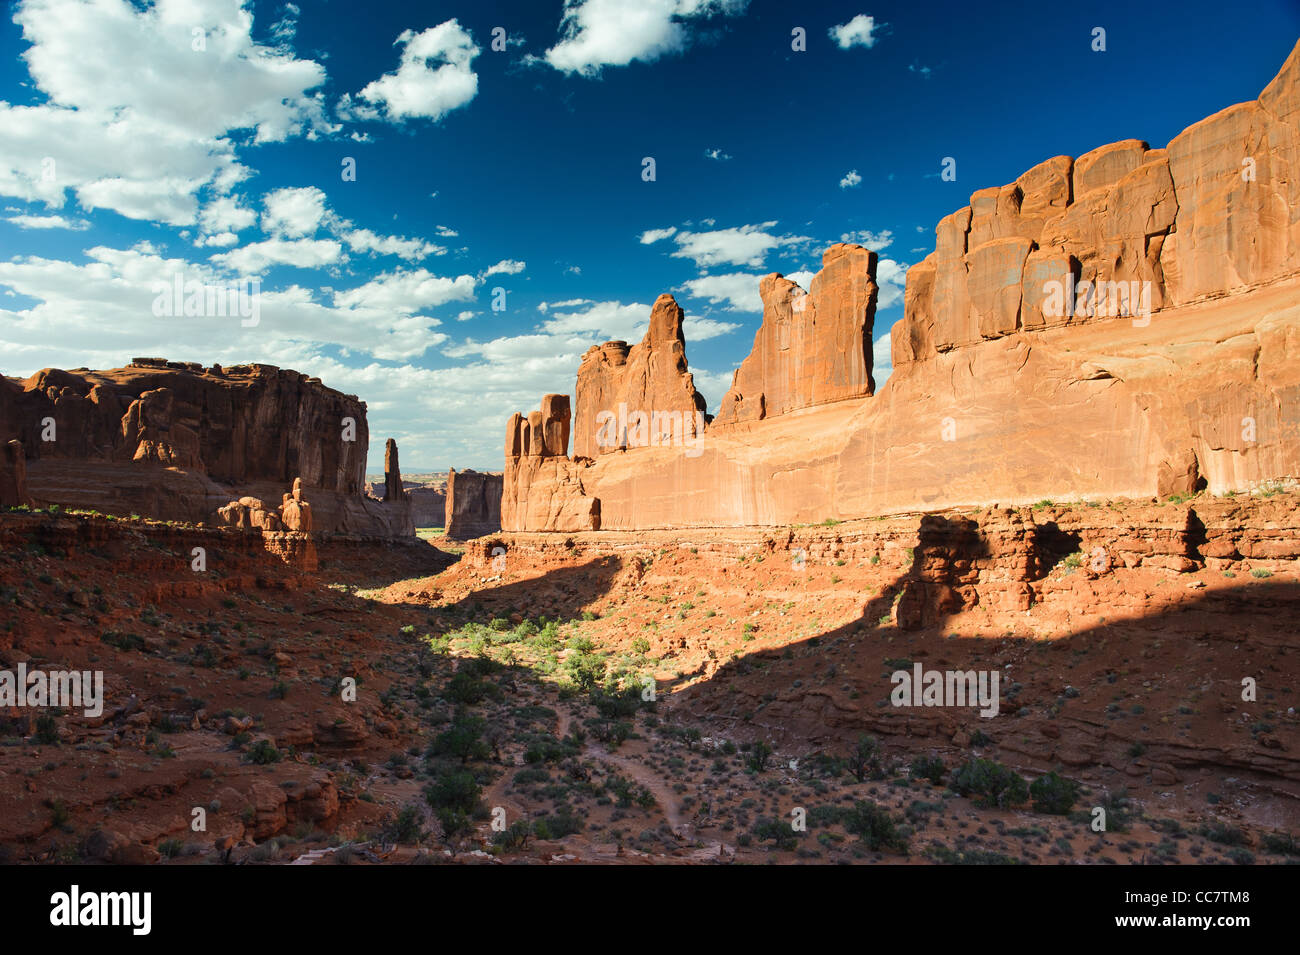 Park Avenue Trail in Arches National Park, Utah, USA Stock Photo